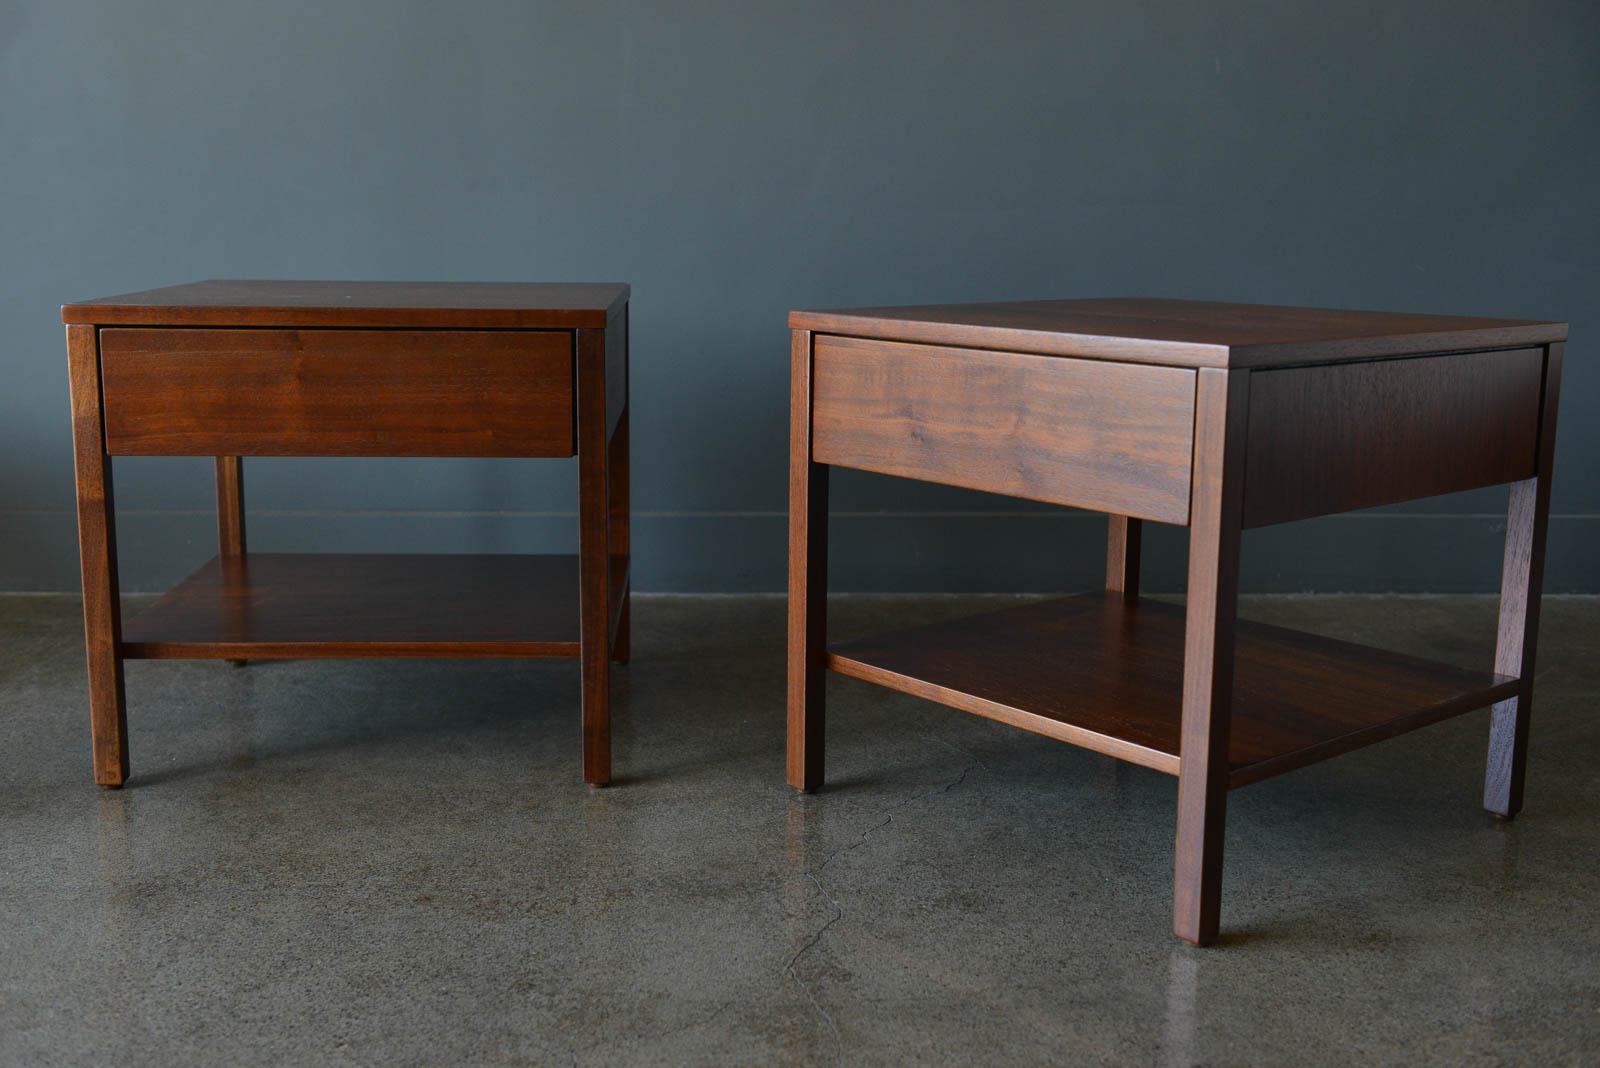 Early pair of walnut nightstands or side tables by Florence Knoll, ca. 1951. Beautiful walnut grain with original drawer dividers and tissue holder. Professionally restored in showroom condition. Measure 19.5 x 19.5 x 18.25 High.